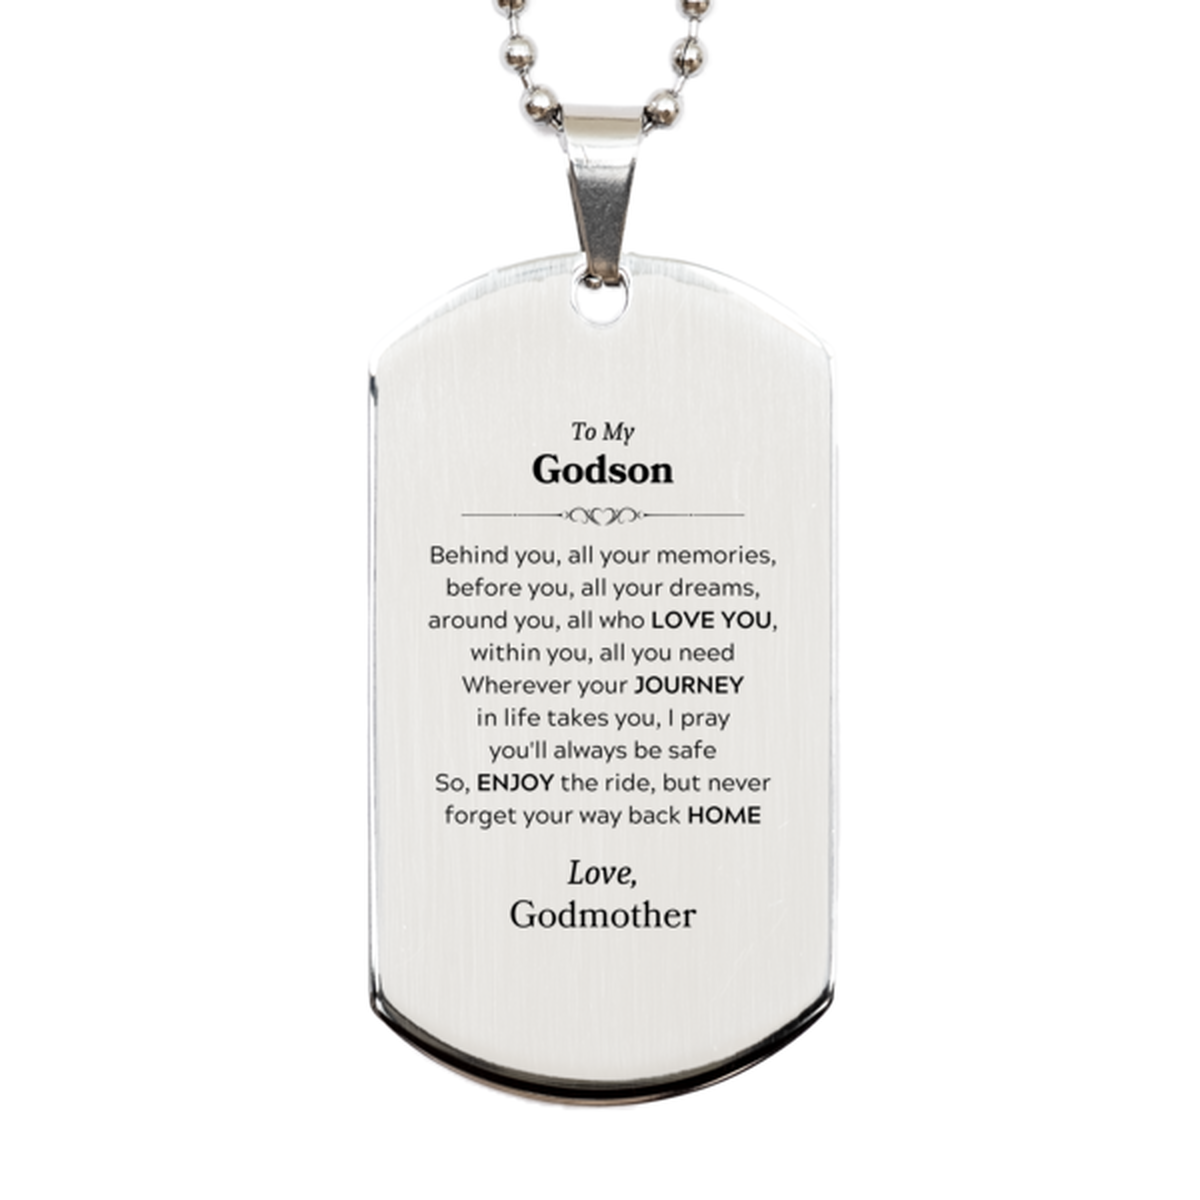 To My Godson Graduation Gifts from Godmother, Godson Silver Dog Tag Christmas Birthday Gifts for Godson Behind you, all your memories, before you, all your dreams. Love, Godmother